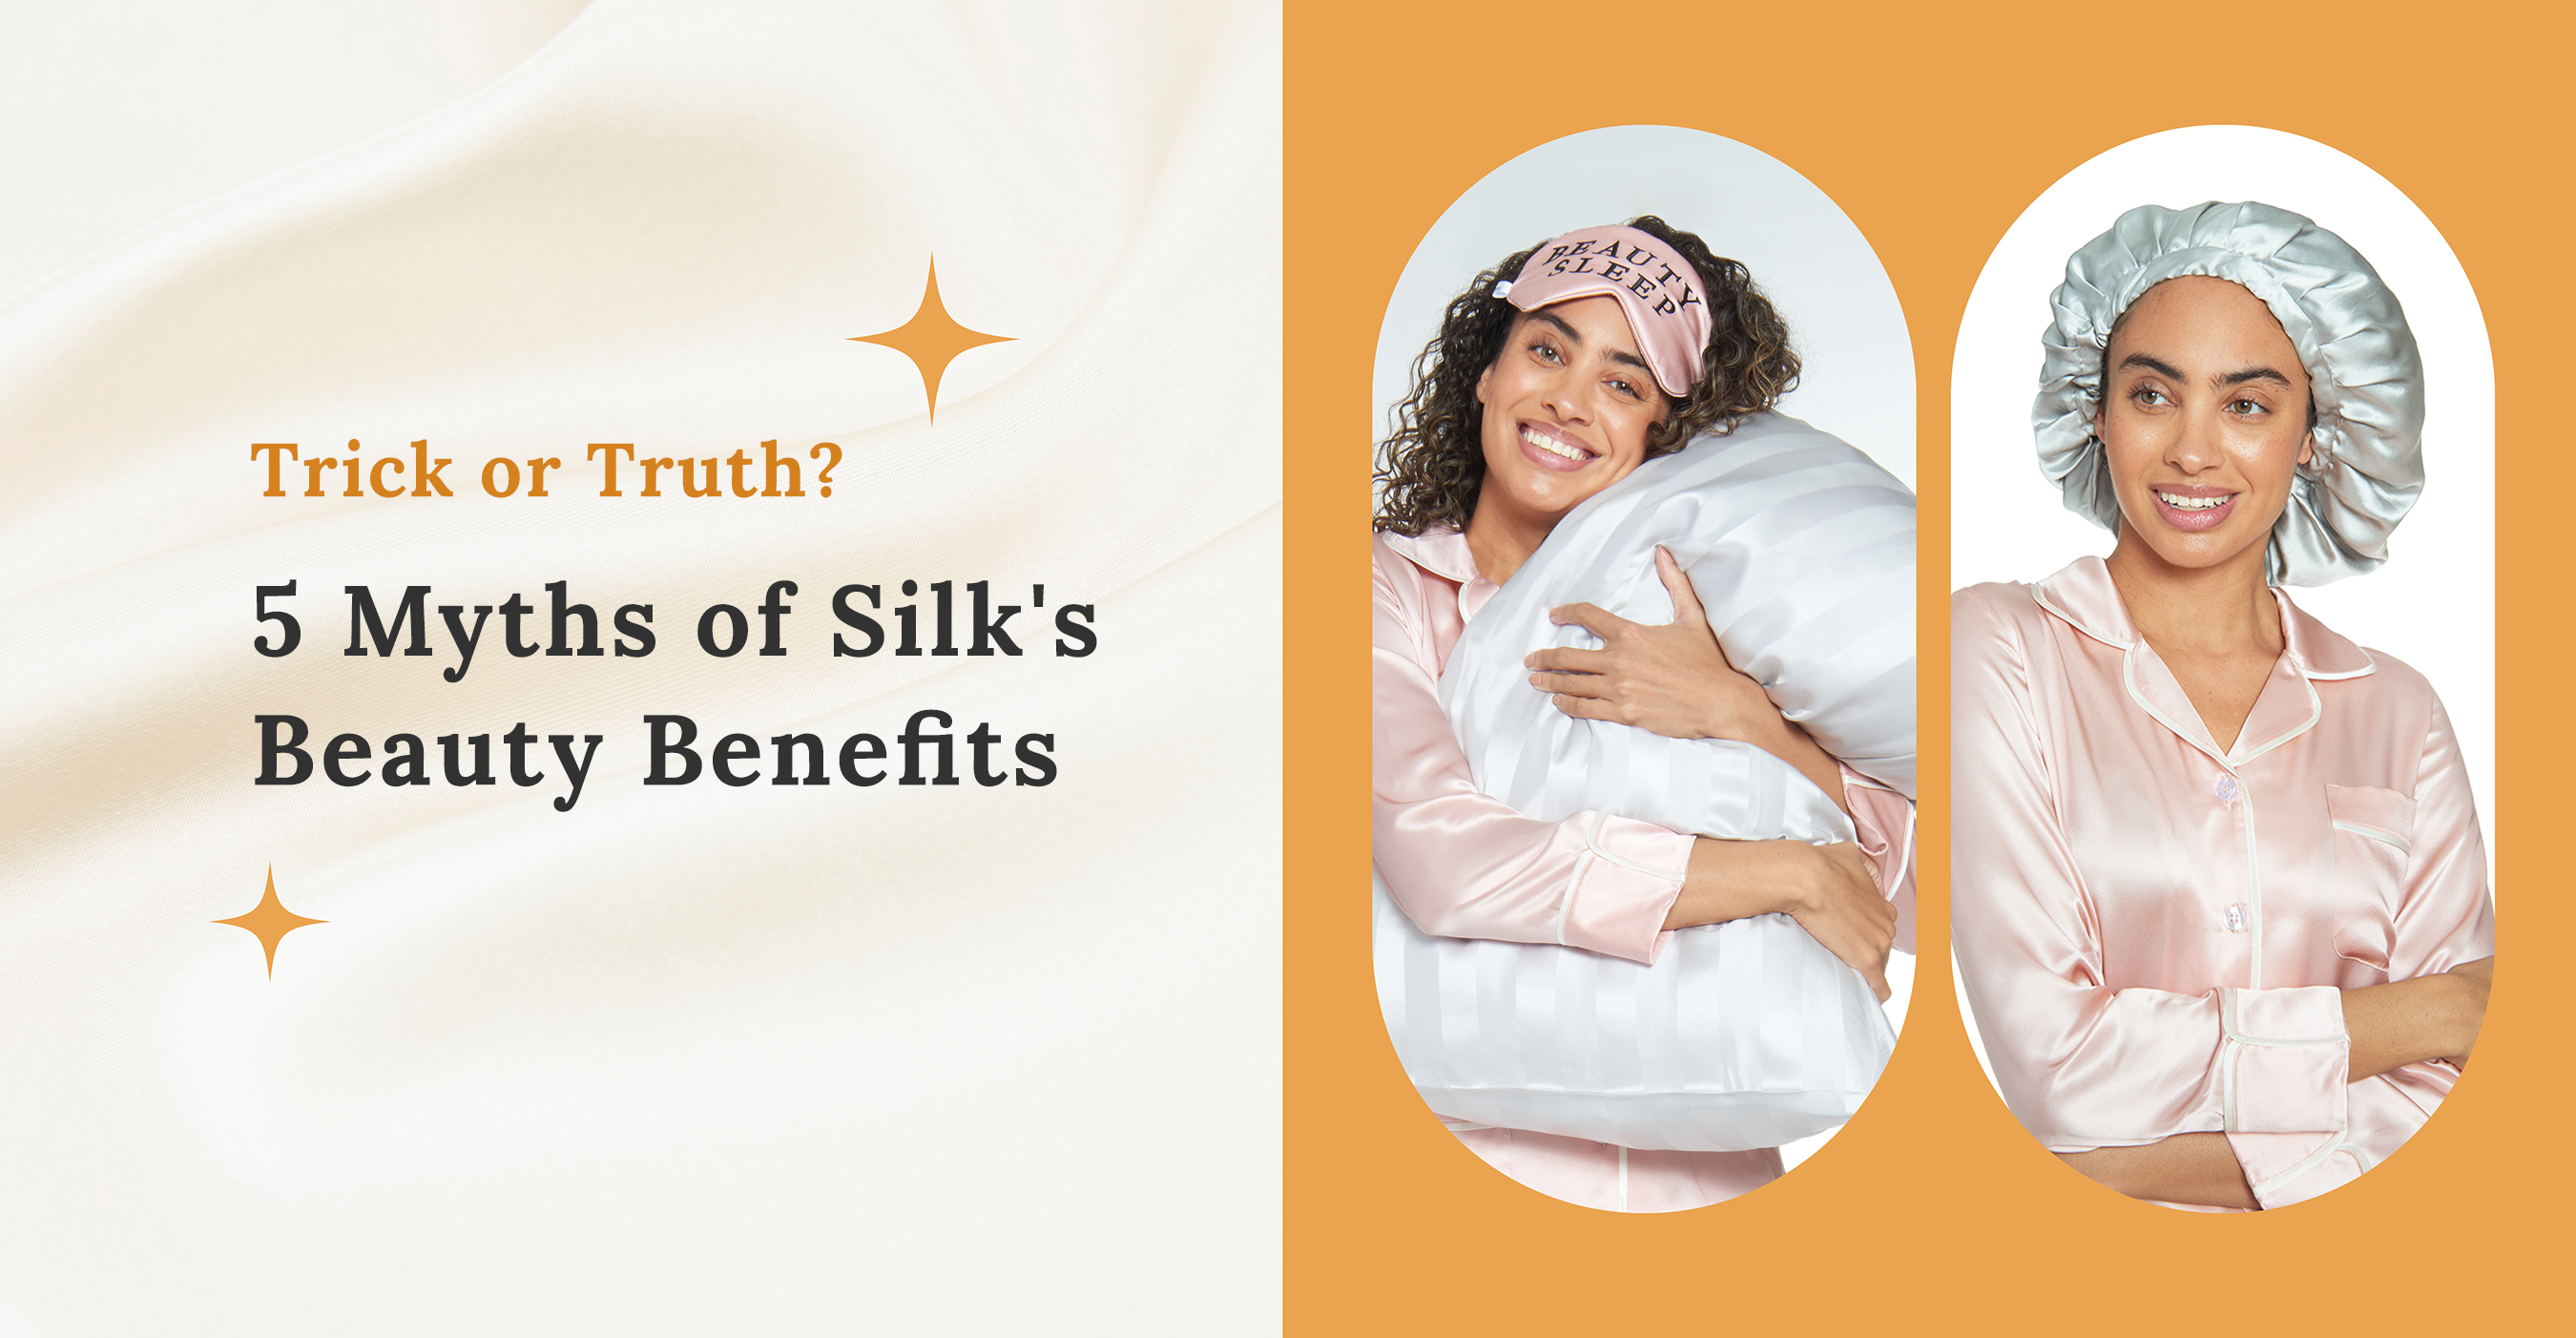 Trick or Truth? 5 Myths of Silk's Beauty Benefits 